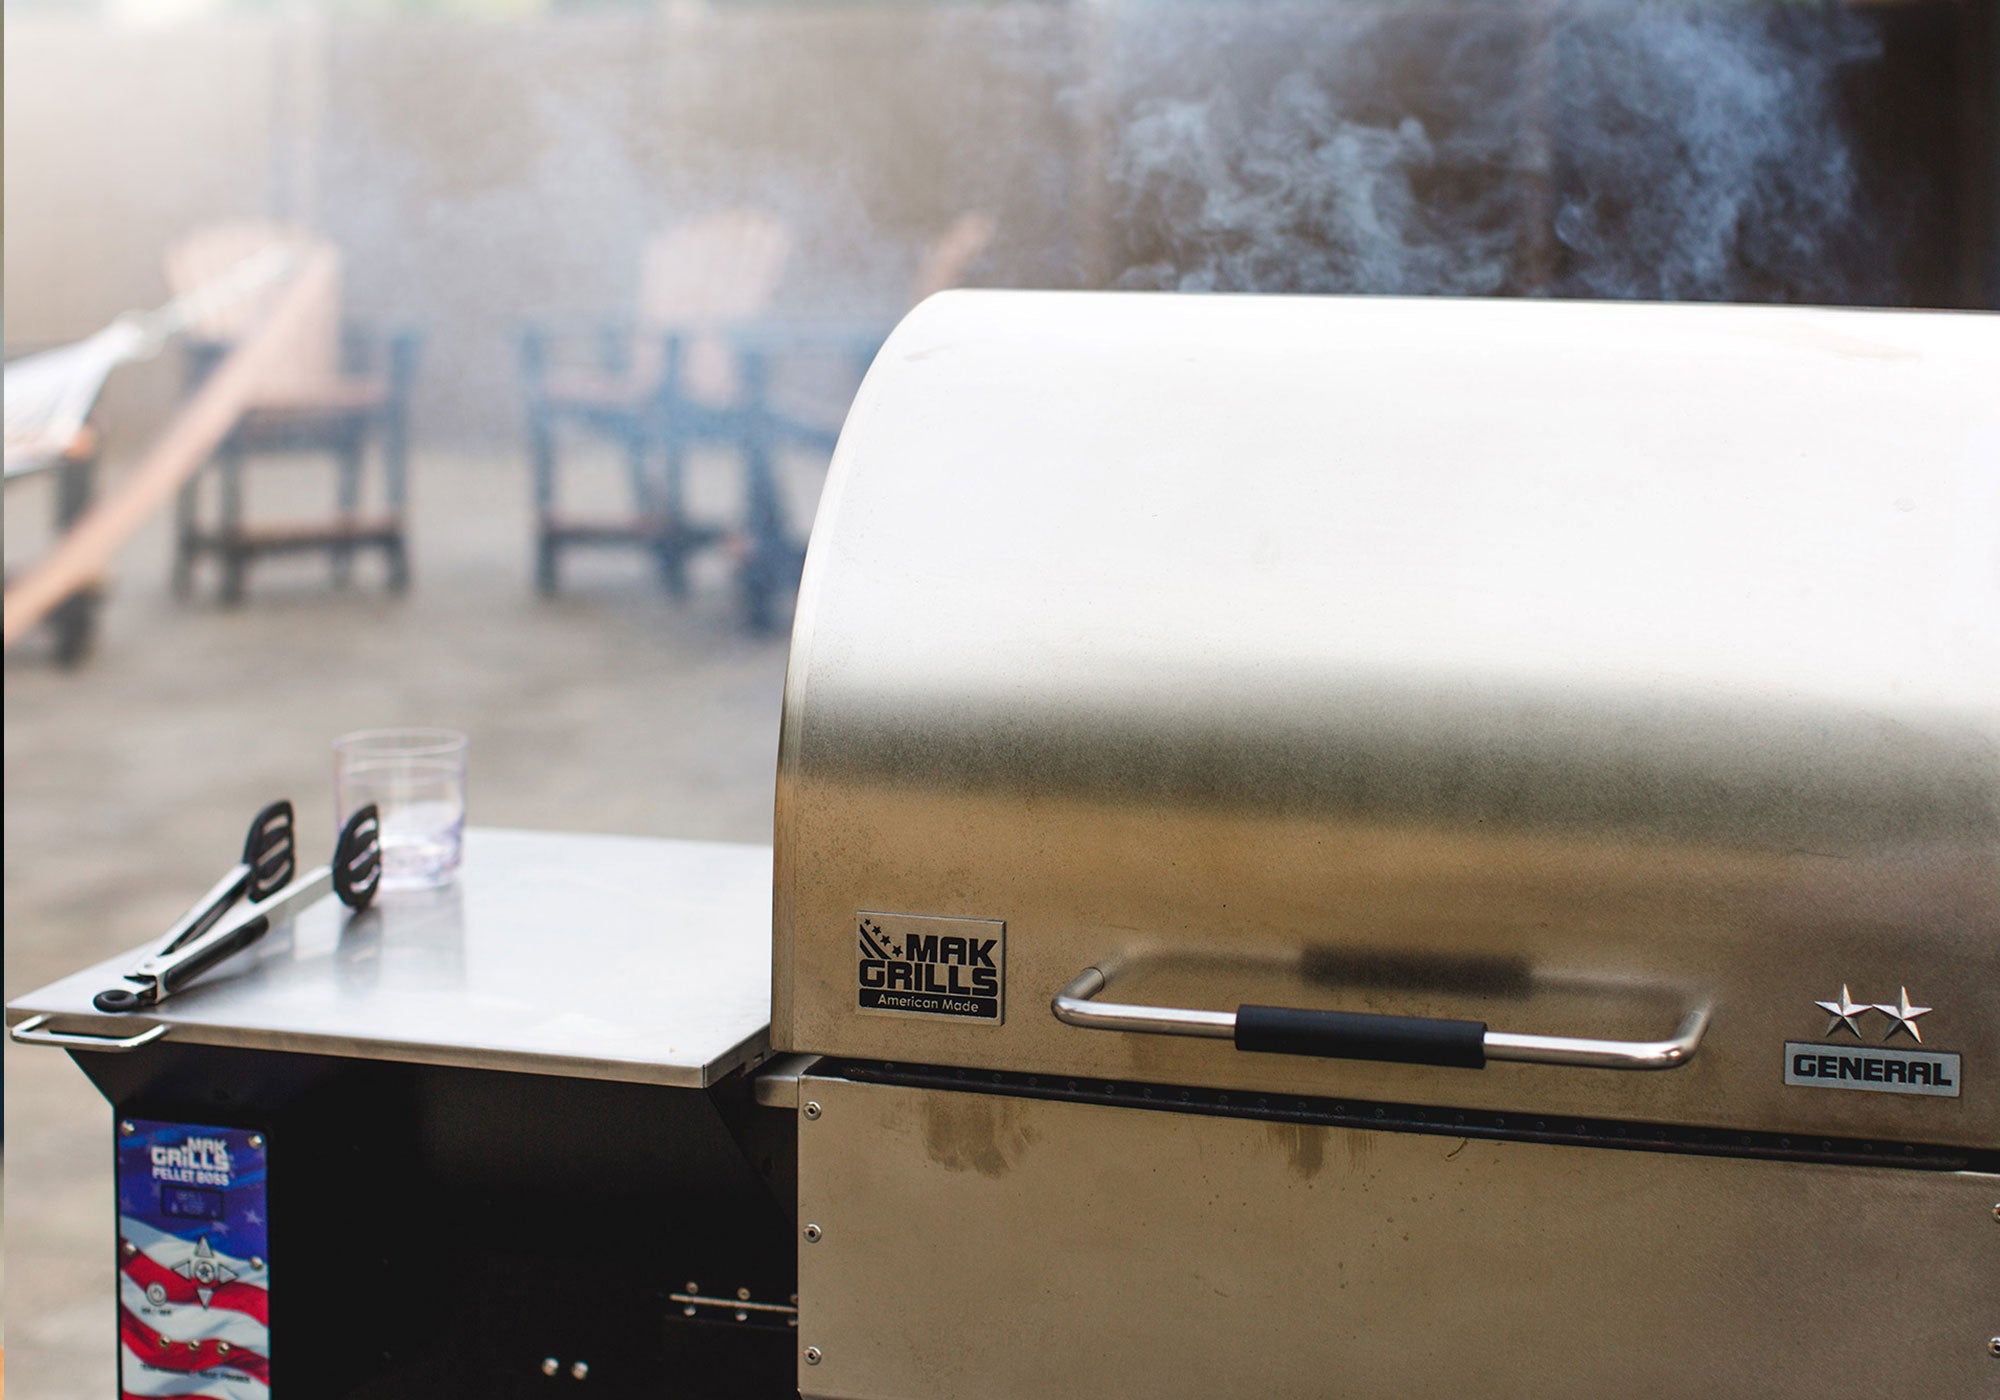 Image of a MAK 2 Star Grill that has meat on it cooking and smoke coming out.  In the distance you can see chairs.